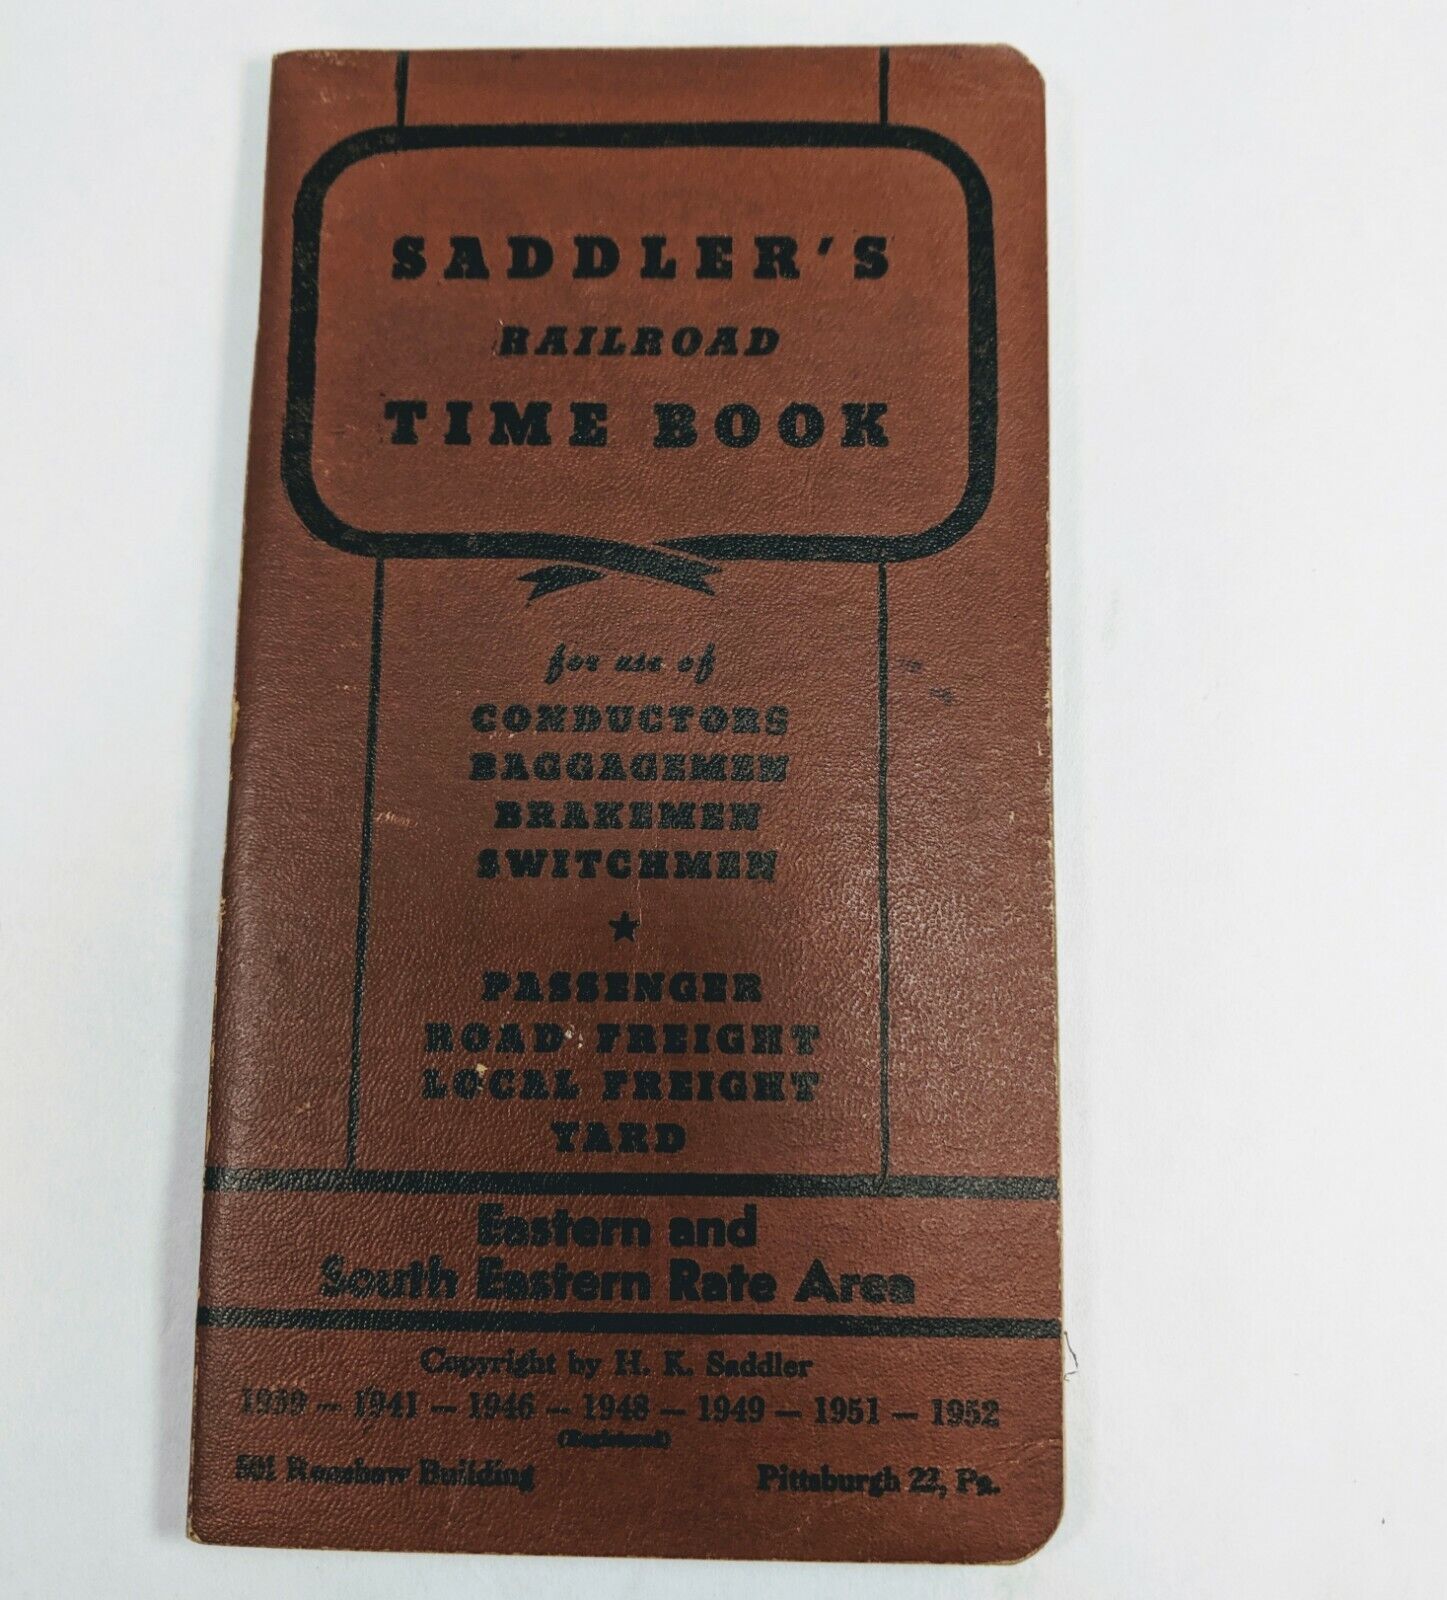 Saddlers Railroad Time Book 1952 1953 Eastern and South Eastern Rate Area